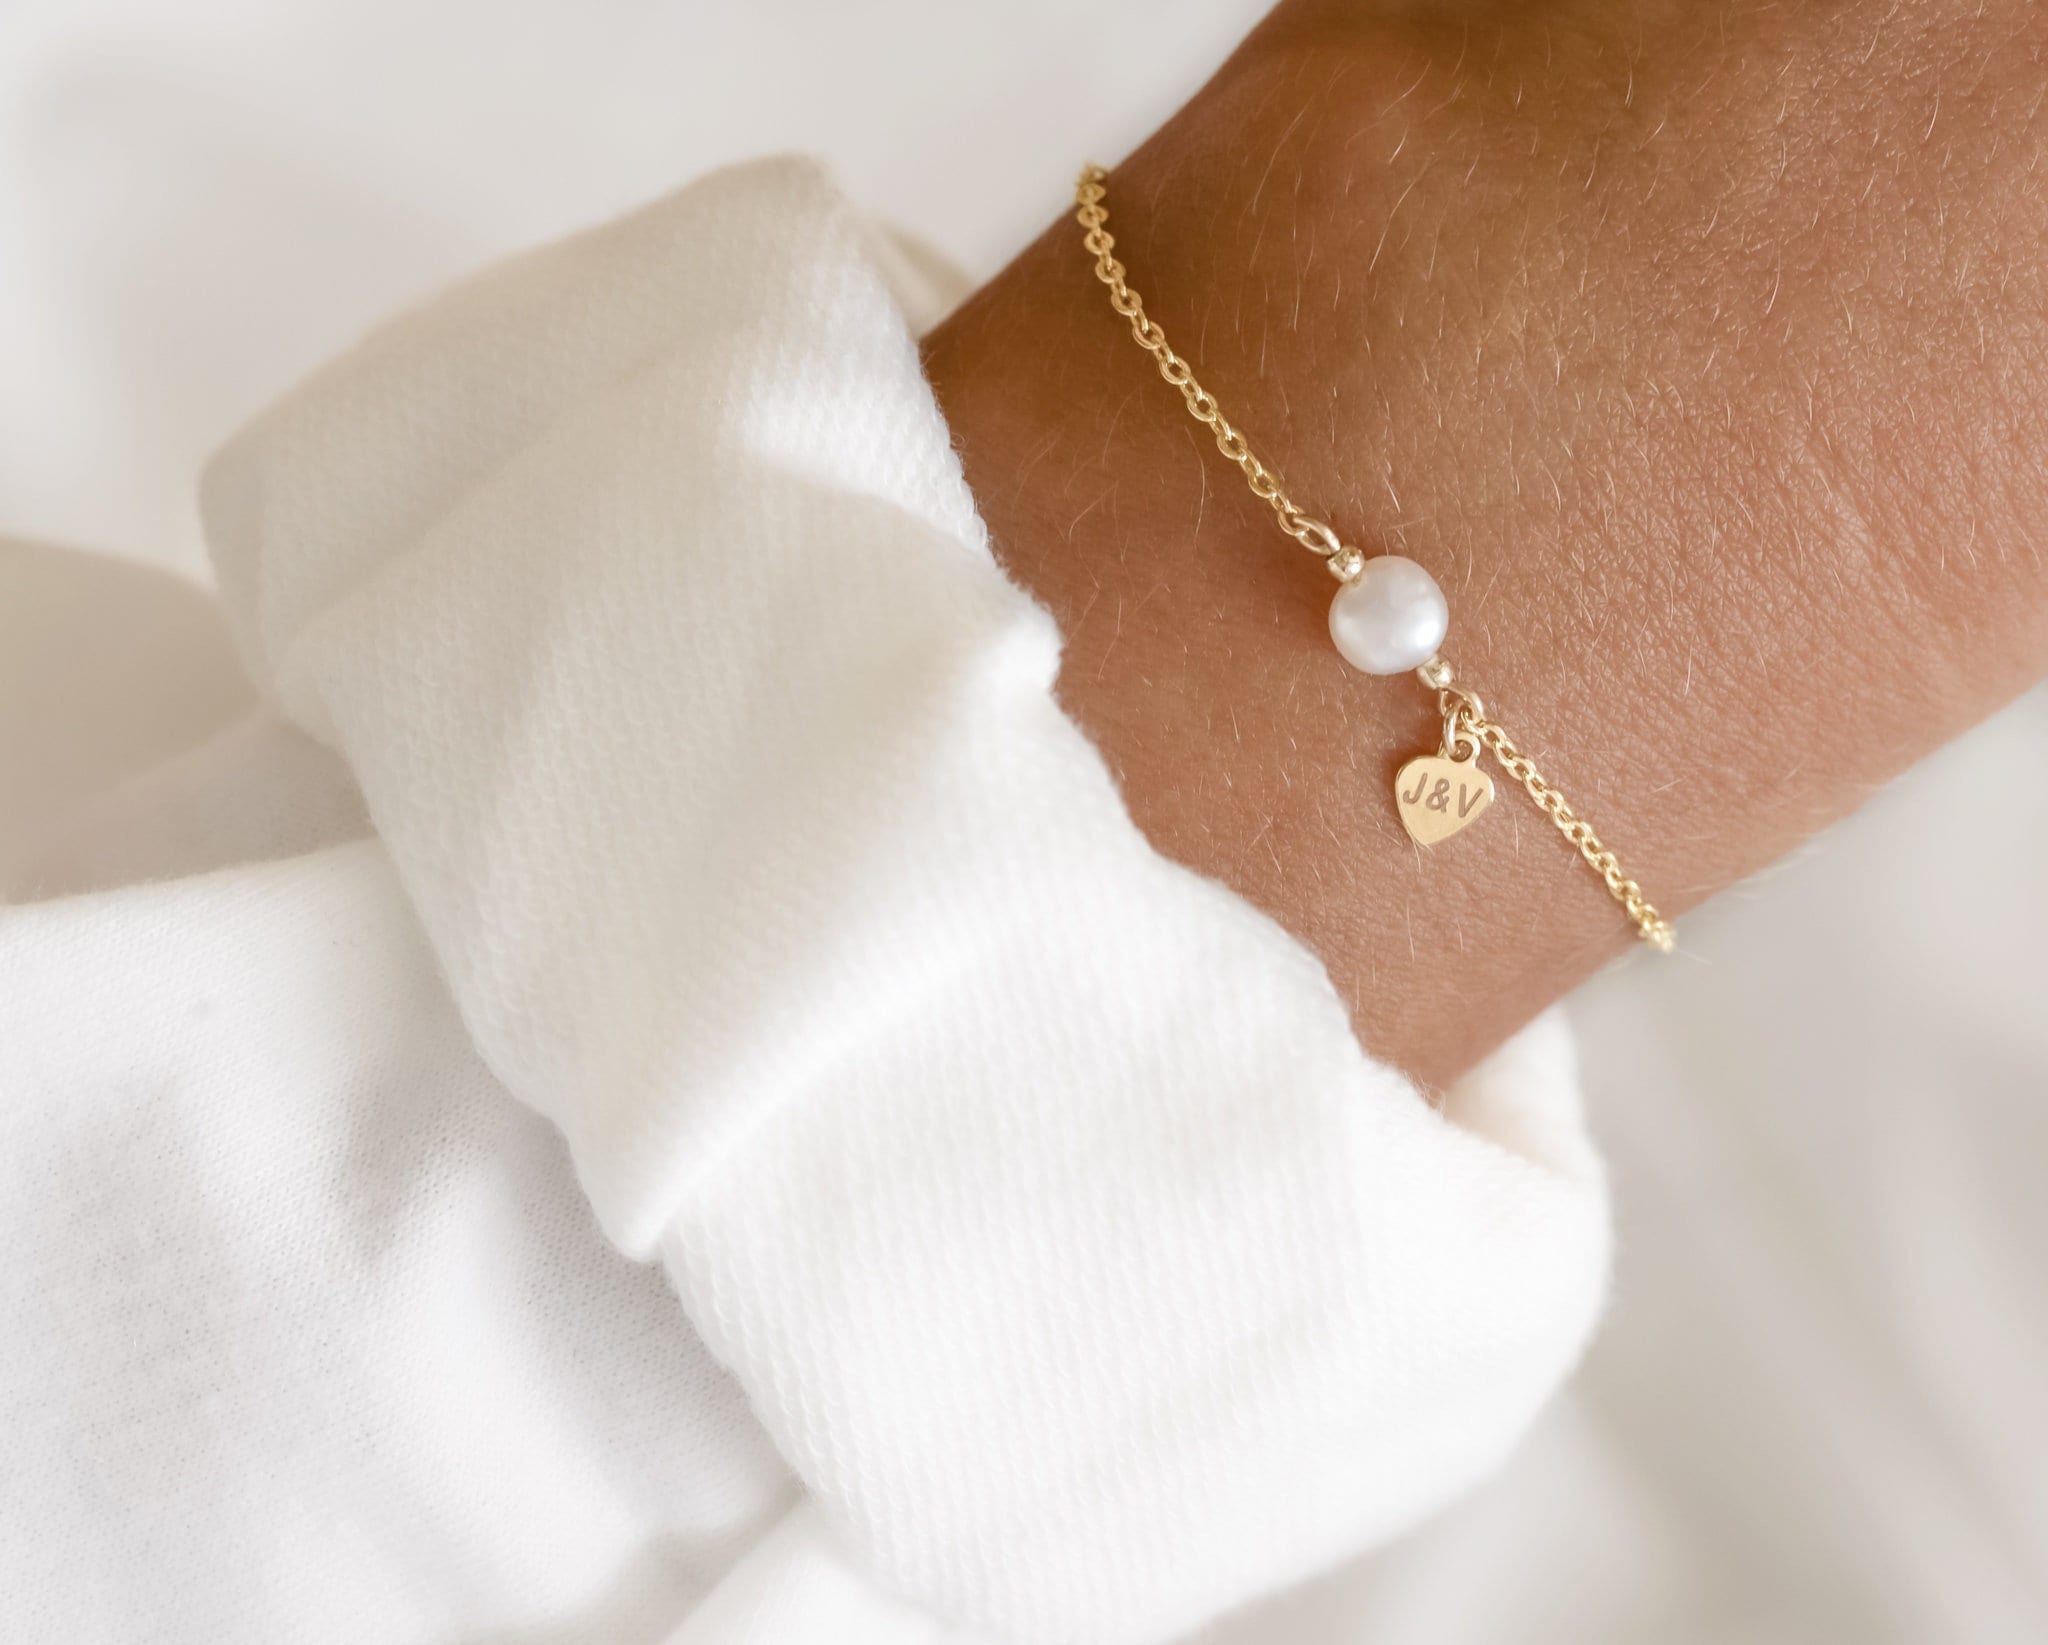 Personalized bridal bracelet with pearl and engravable heart charm | gift maid of honor